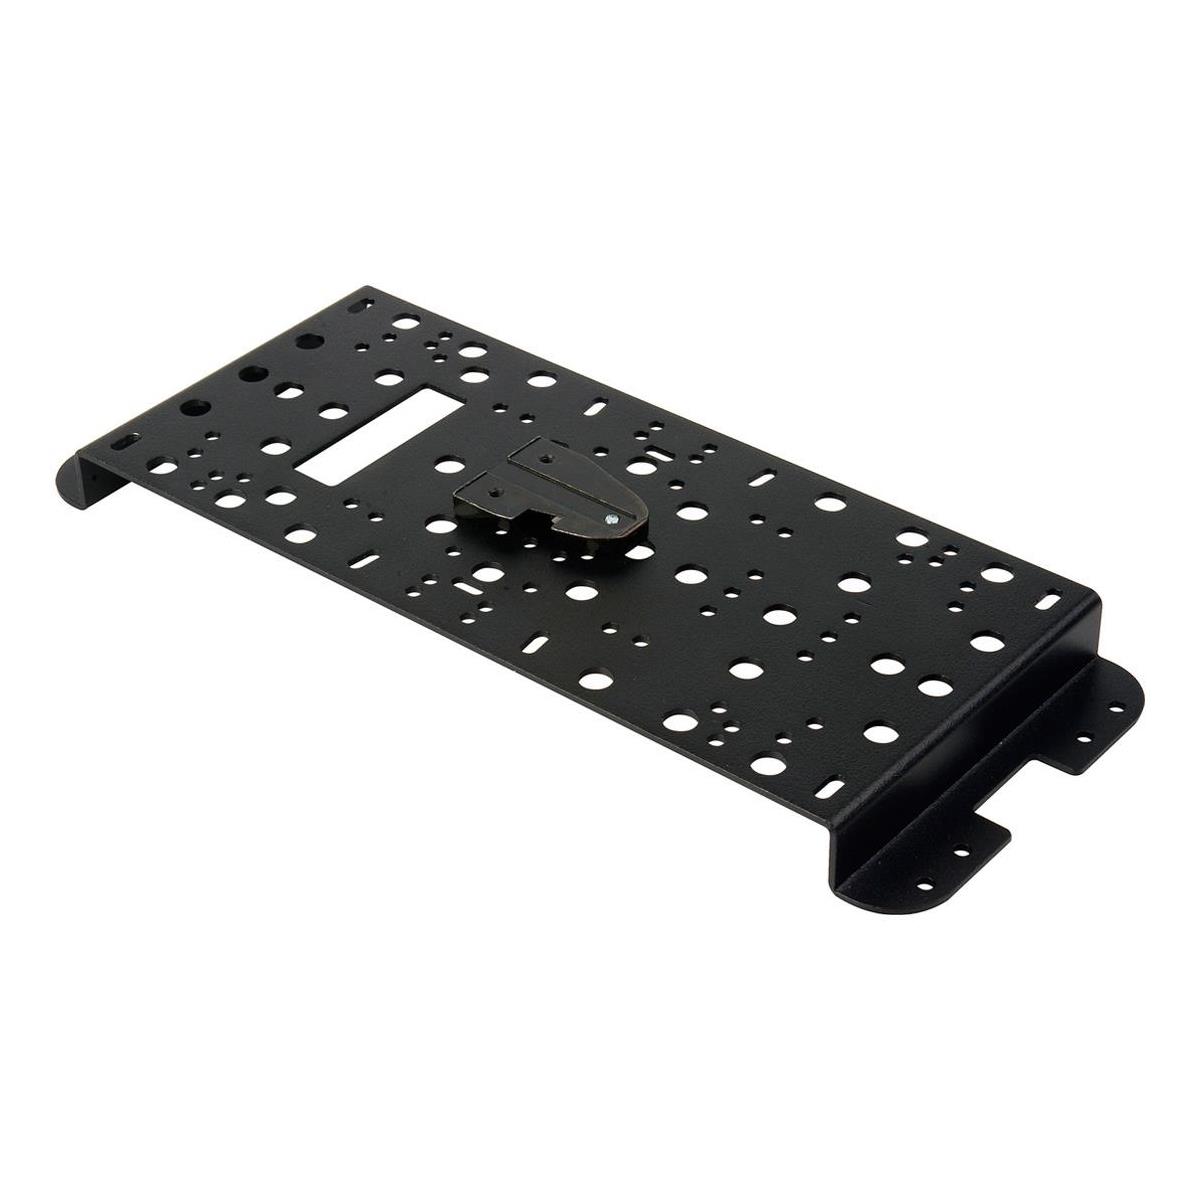 Image of Camplex Cheese Plate with V-Mount Block Plate (No Power) for BLACKJACK-1 Adapter